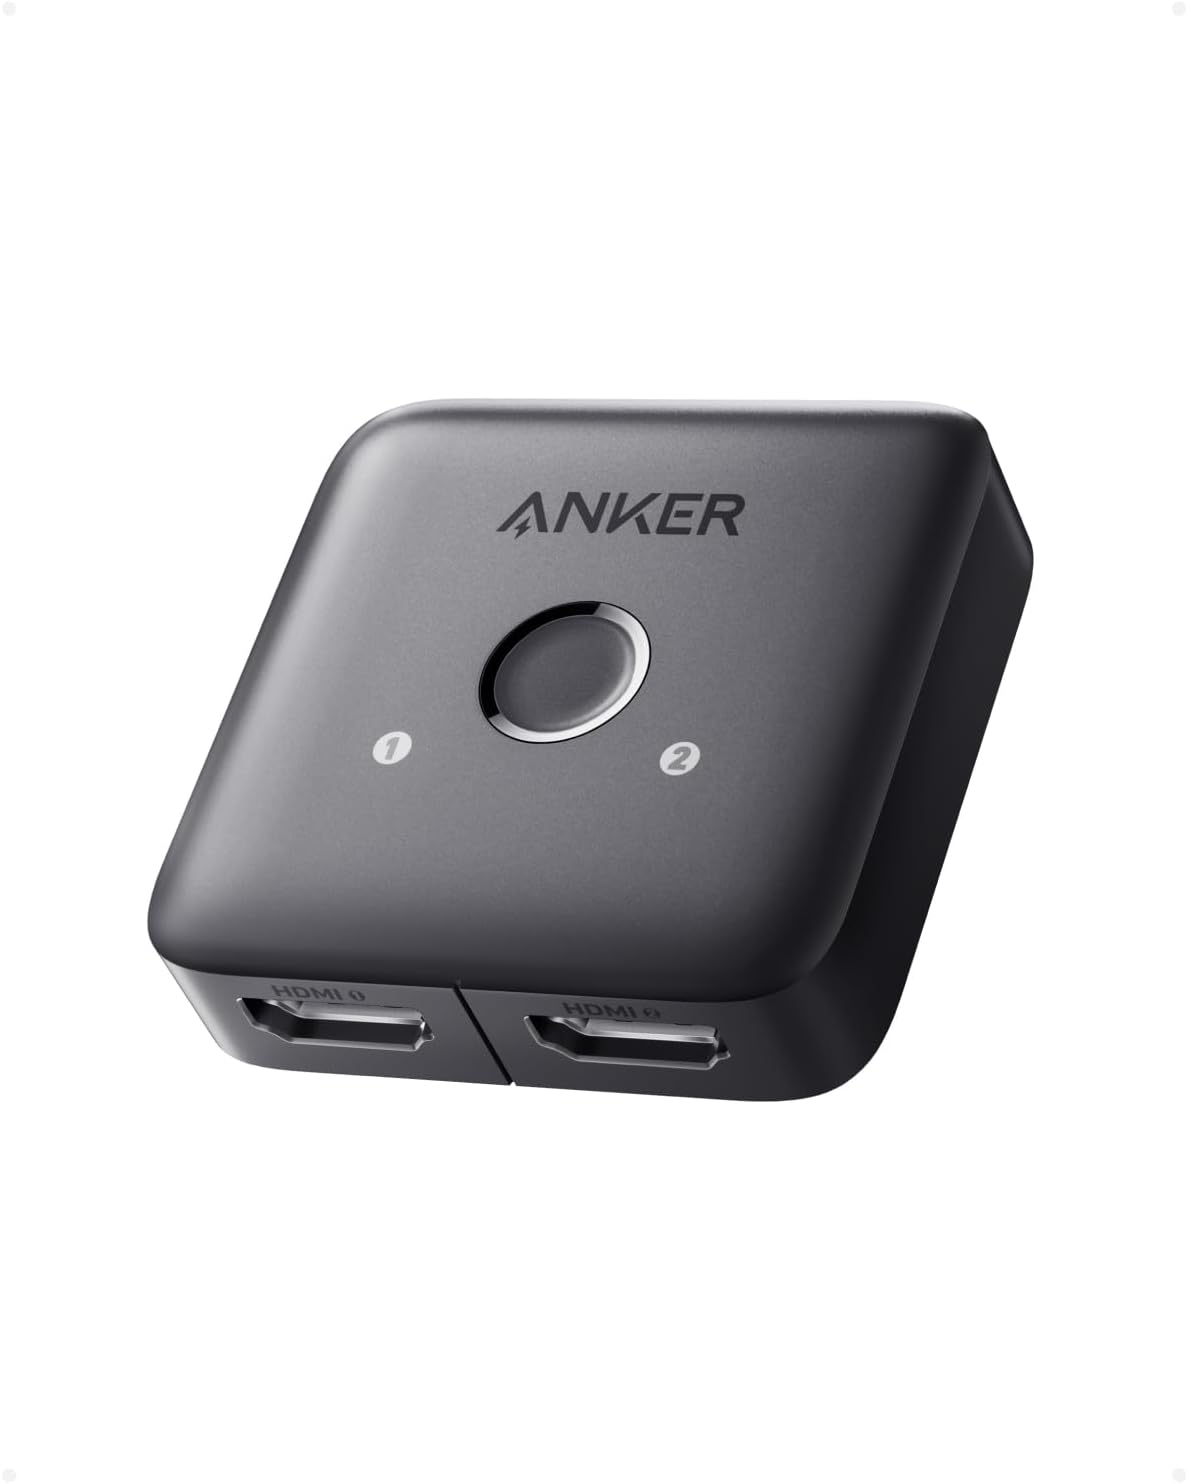 Anker HDMI Switch (2-in-1 Out, 4K HDMI) 双方向 セレクター 4K HDR 3Dコンテンツ対応 HDMI分配器 切替器 MacBook Pro/Air Switch Xbox 360 他｜ankerdirect｜02